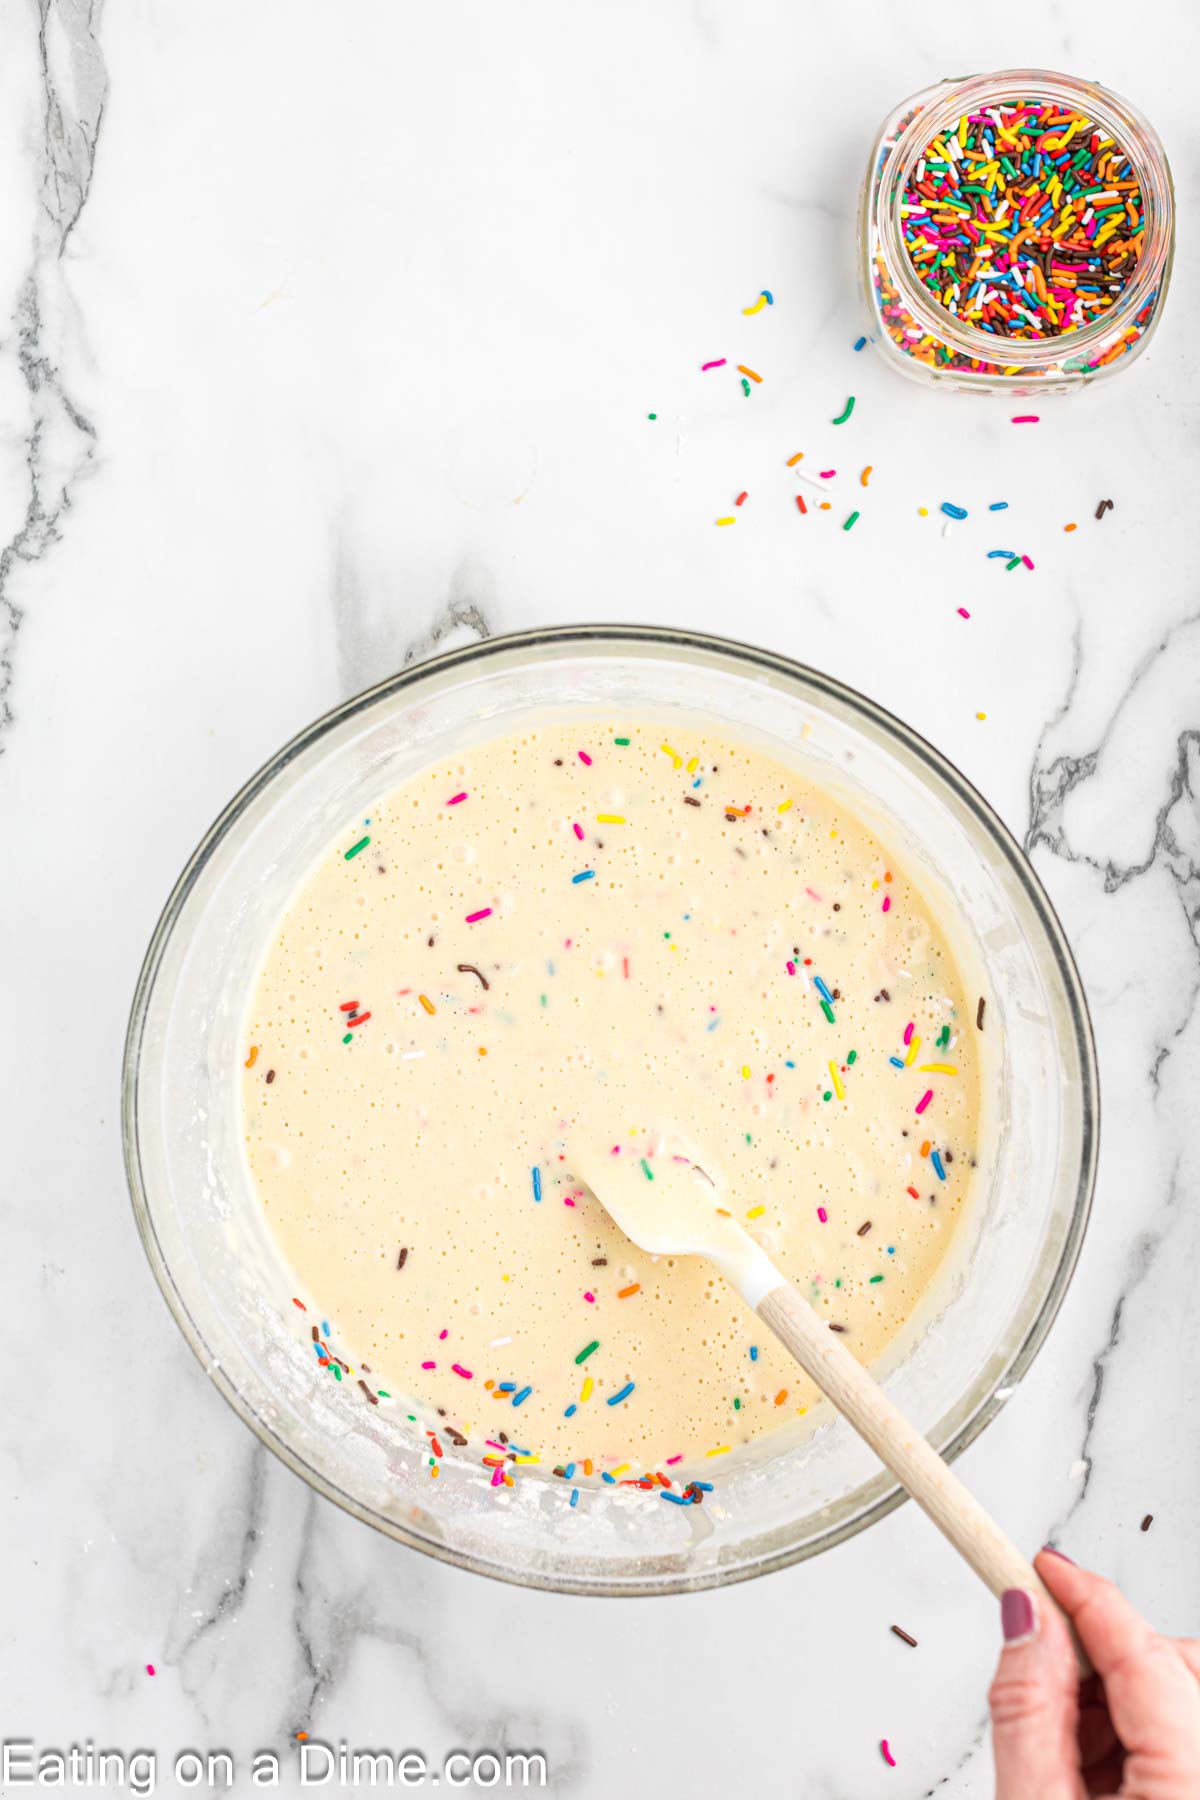 Mixing in the sprinkles into the cupcake batter